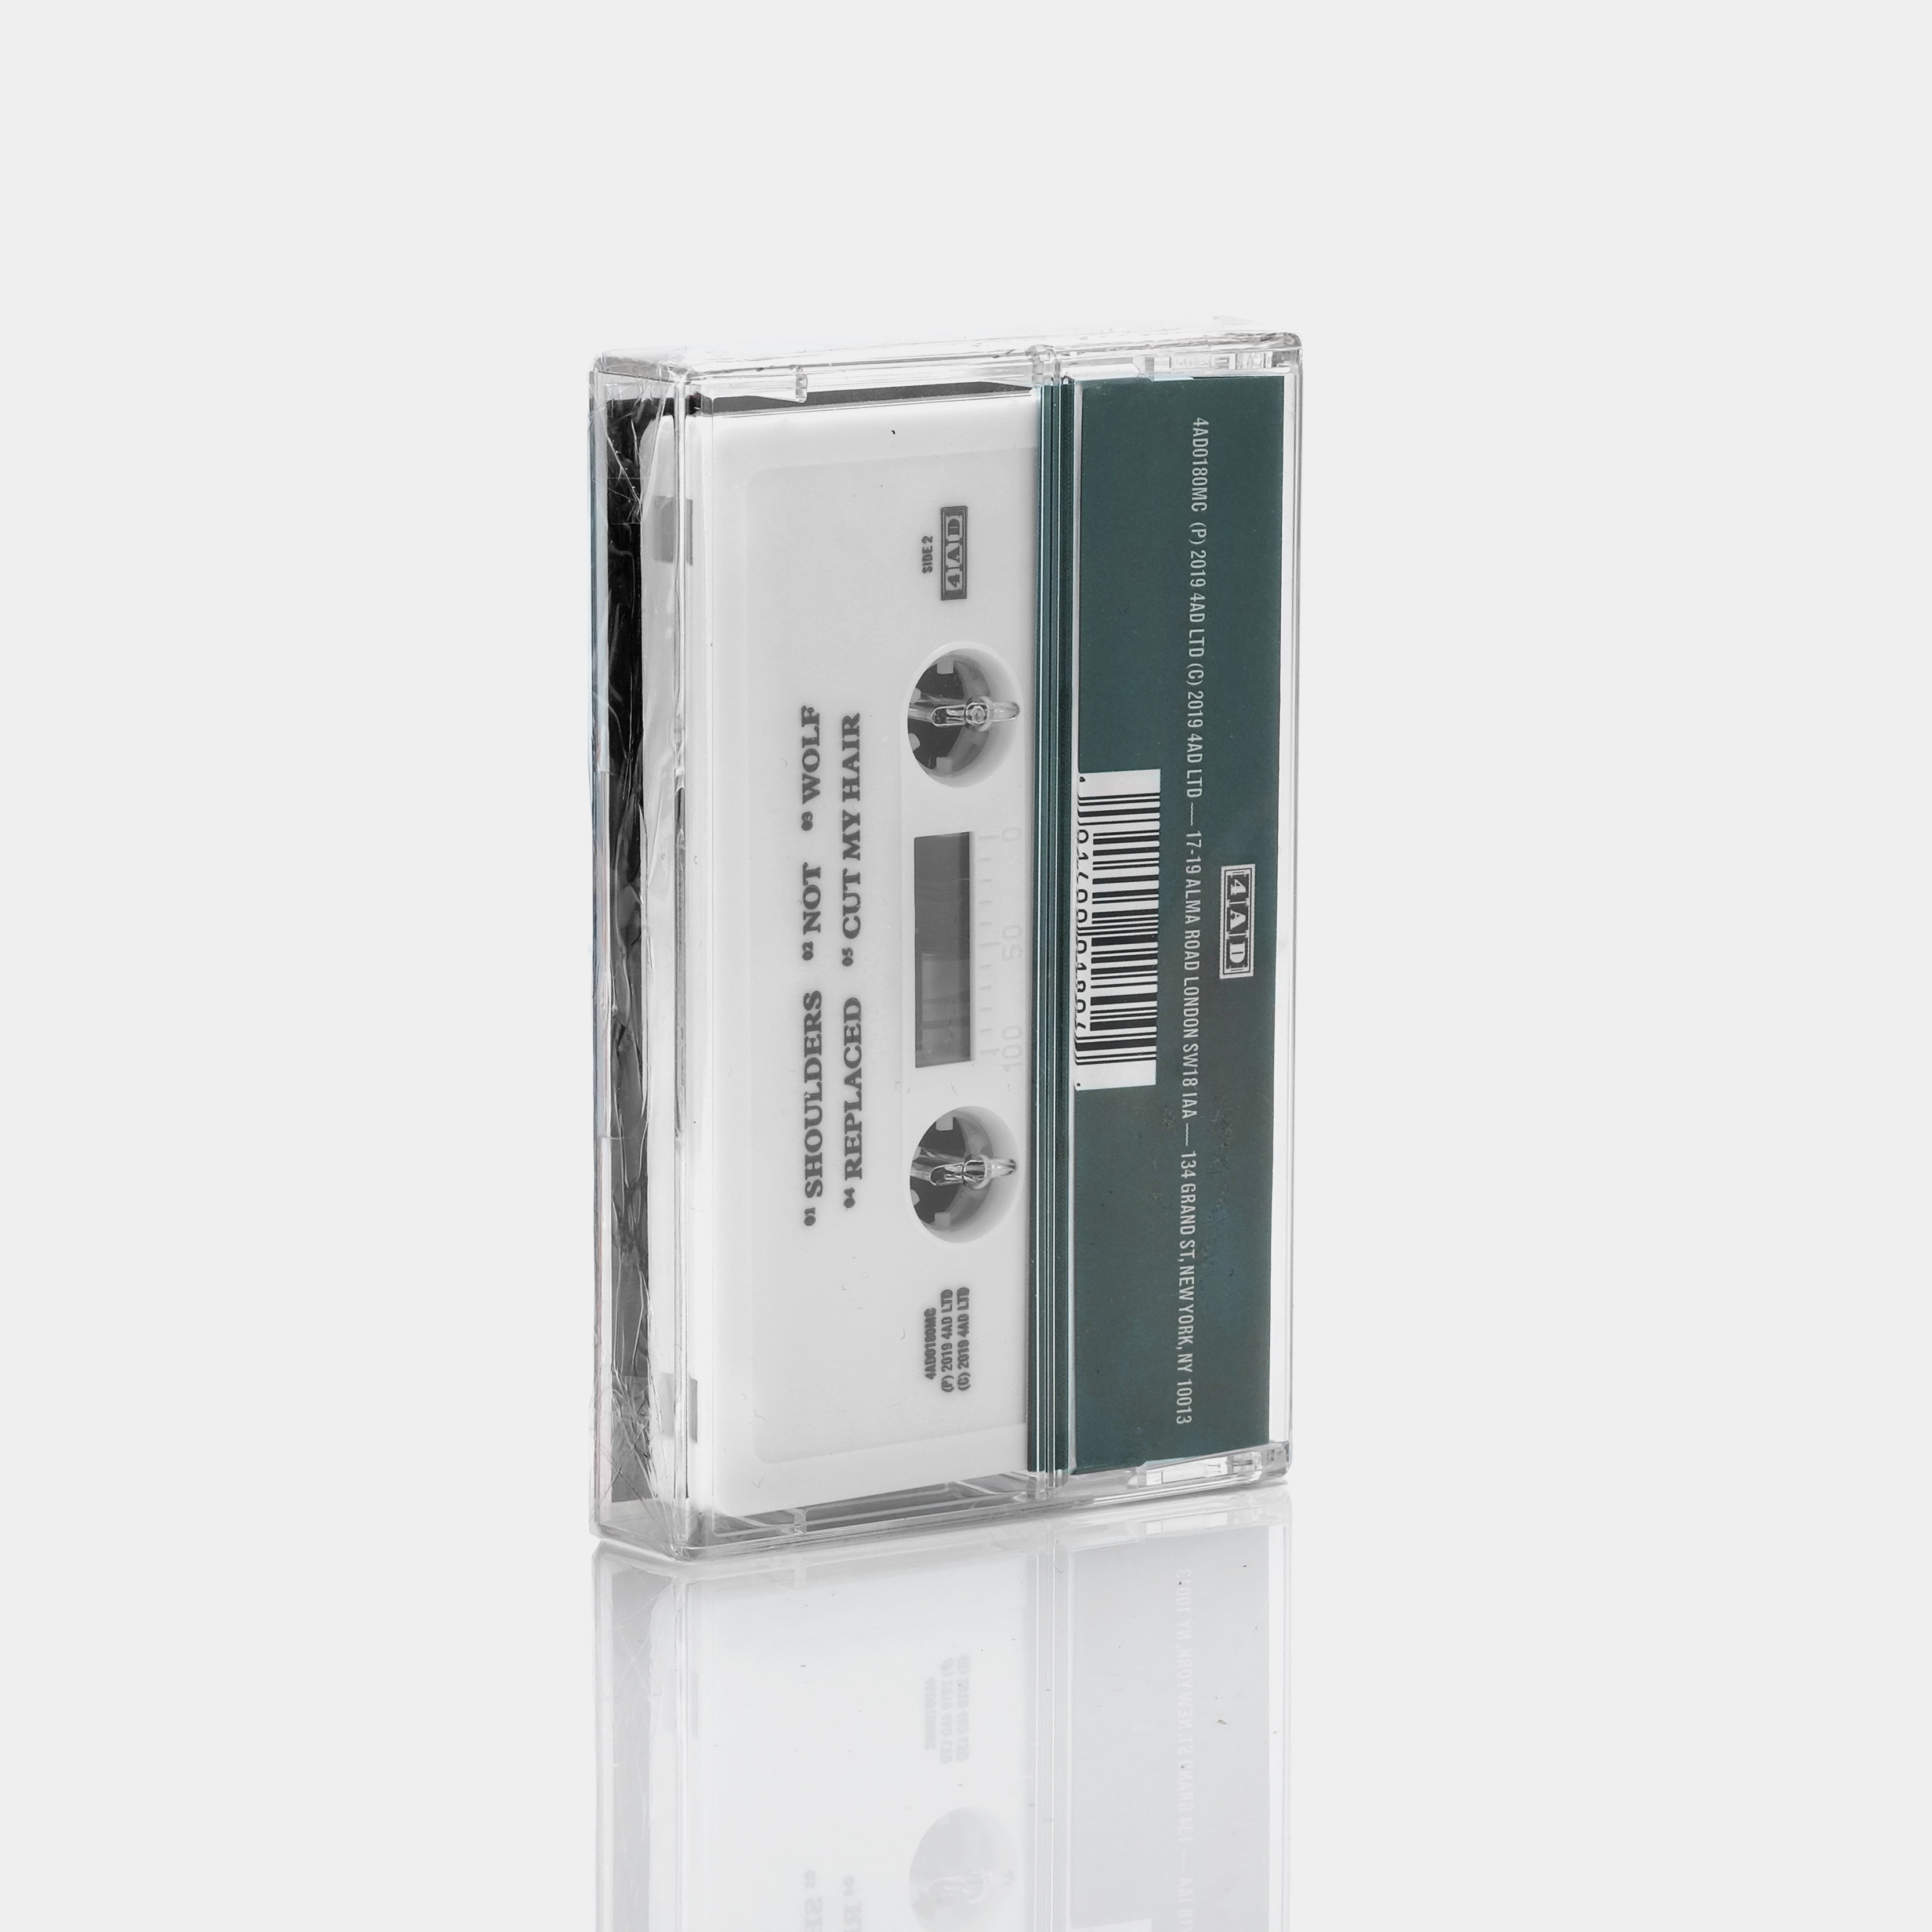 Big Thief - Two Hands Cassette Tape